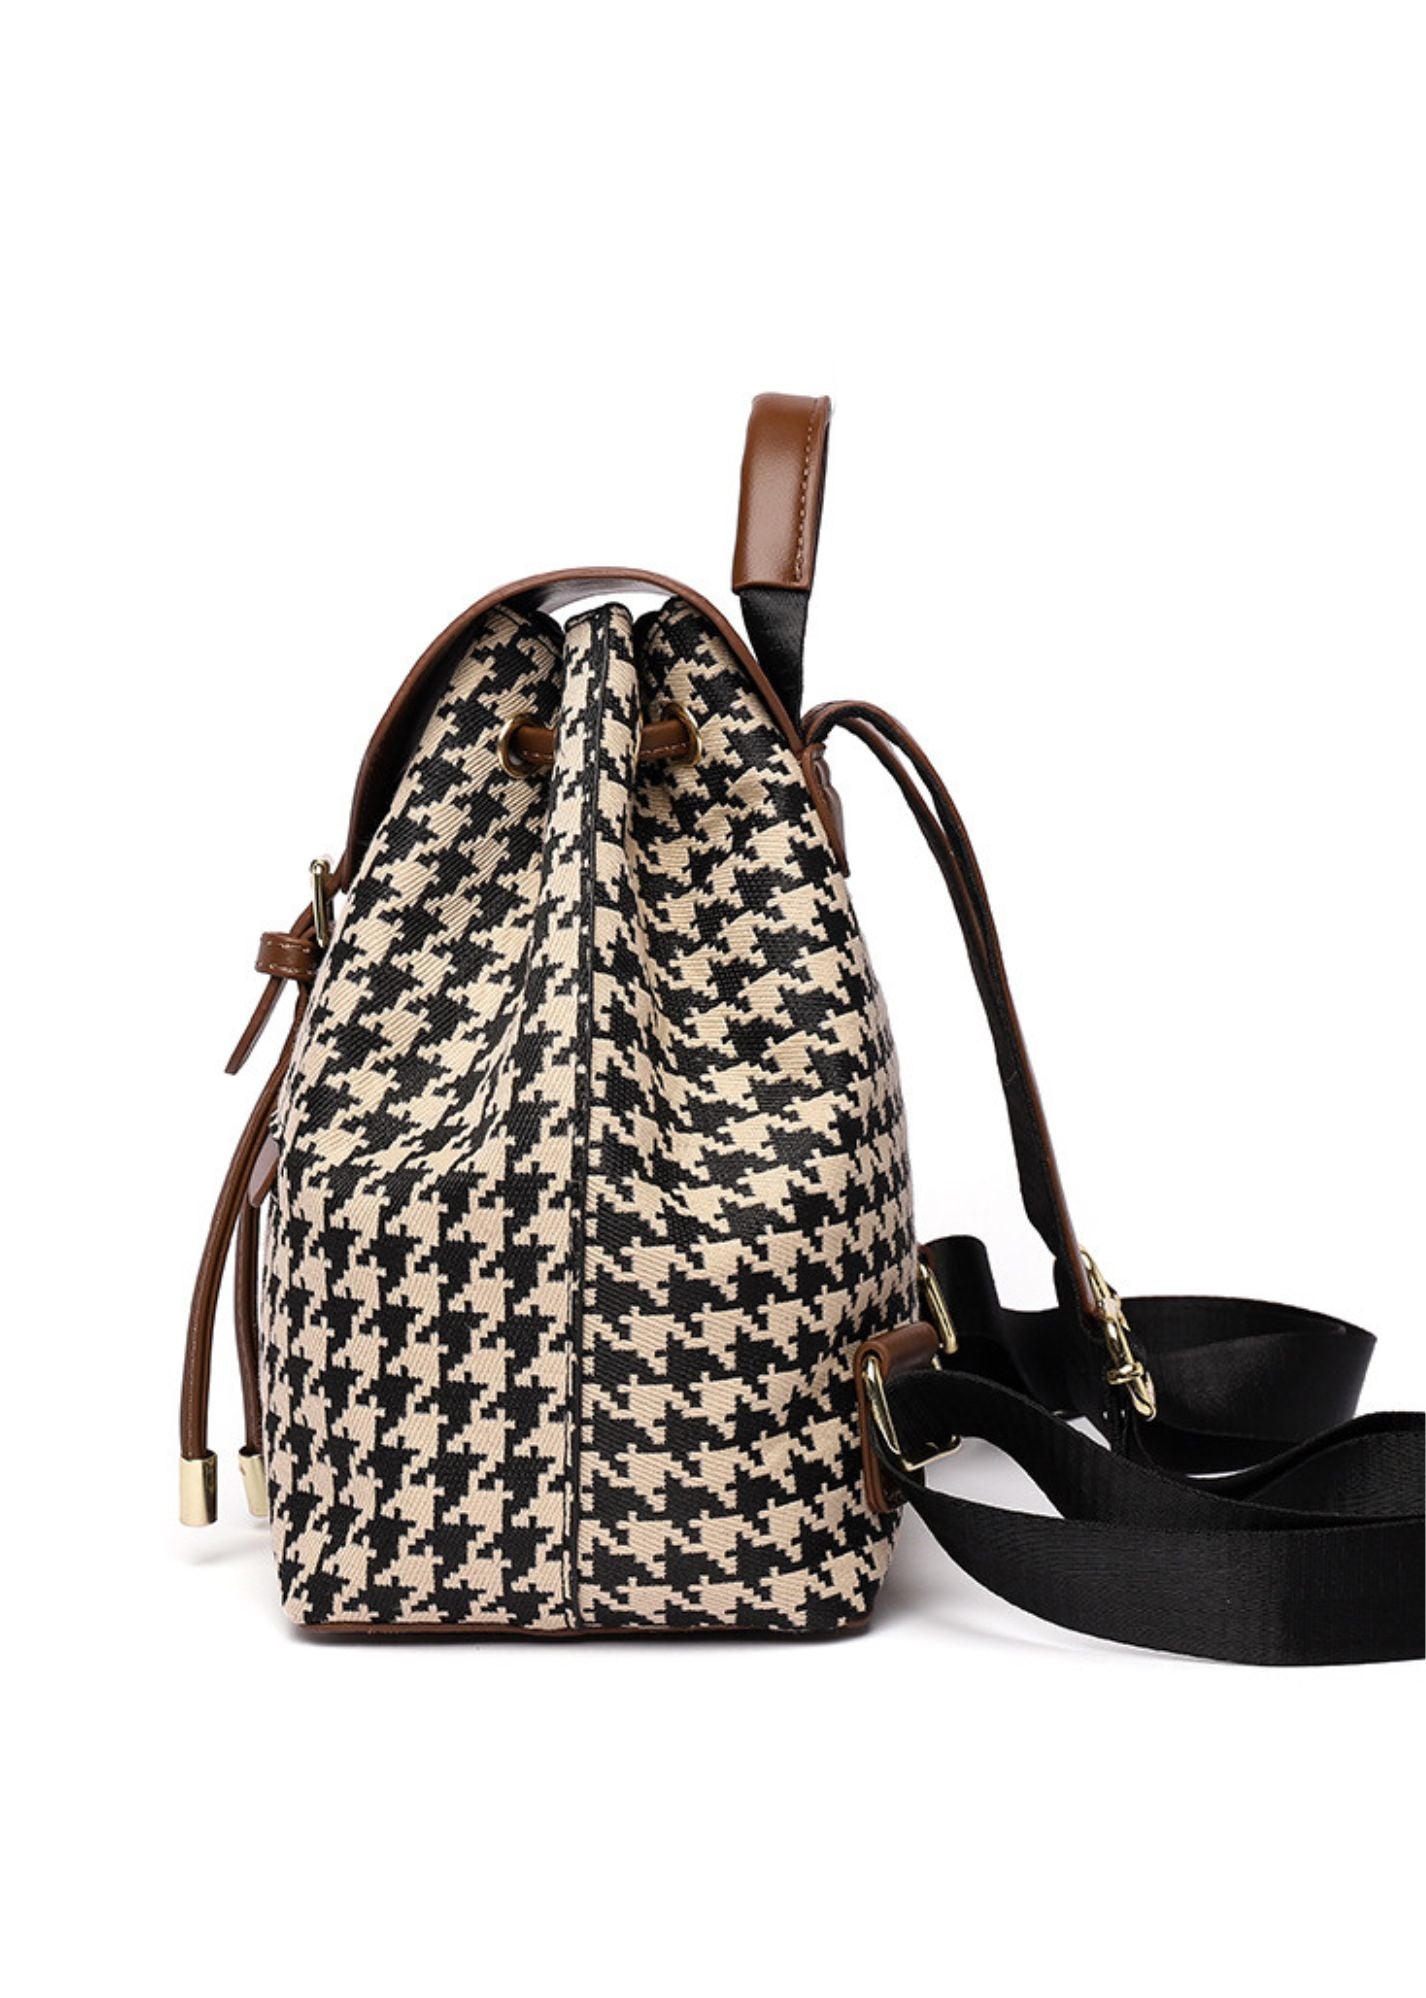 Houndstooth Women's Backpack, High Capacity Bags